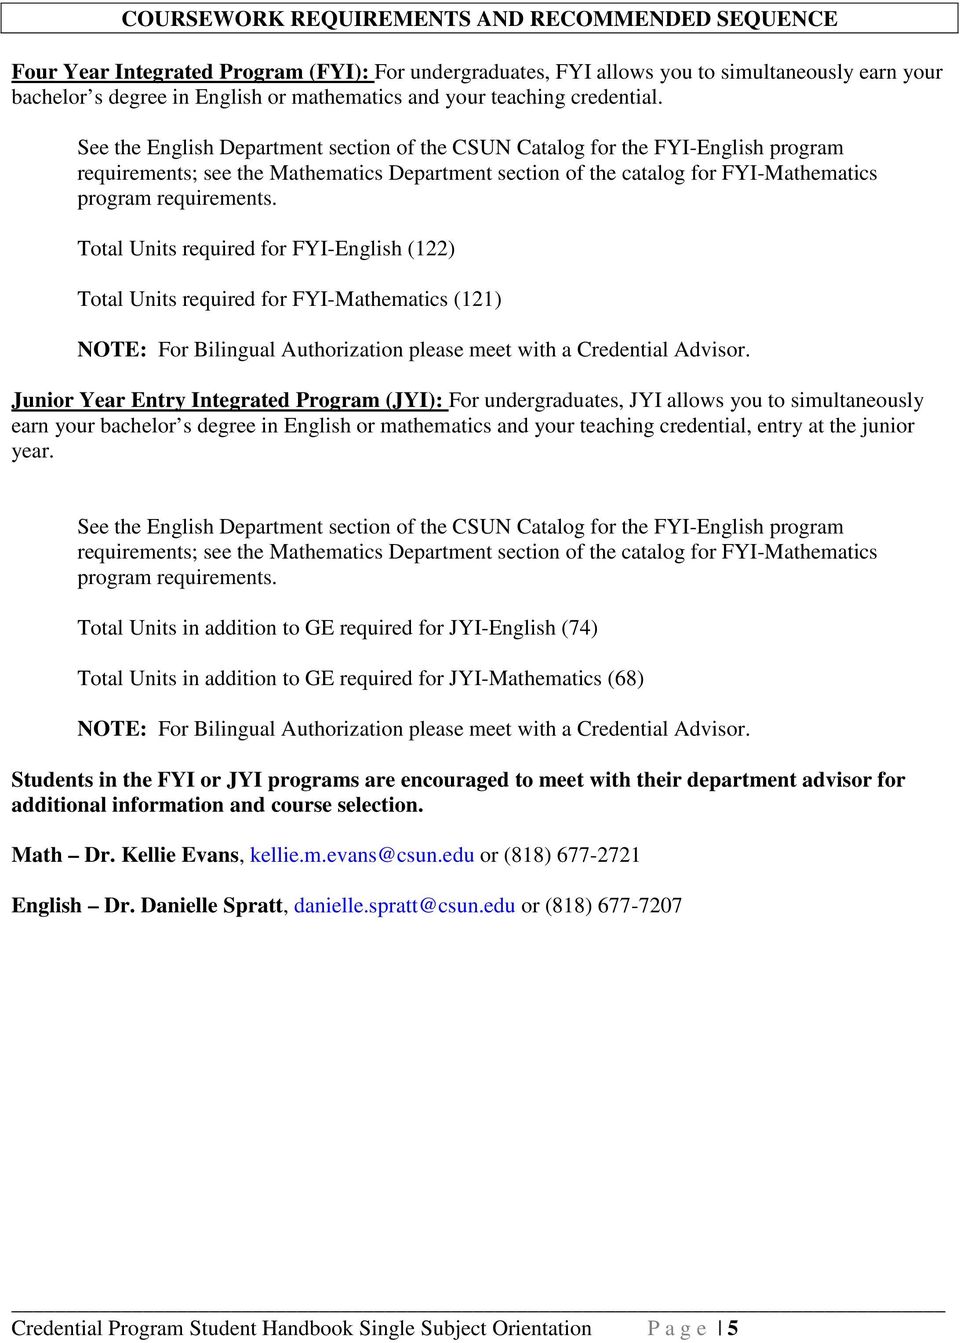 See the English Department section of the CSUN Catalog for the FYI-English program requirements; see the Mathematics Department section of the catalog for FYI-Mathematics program requirements.